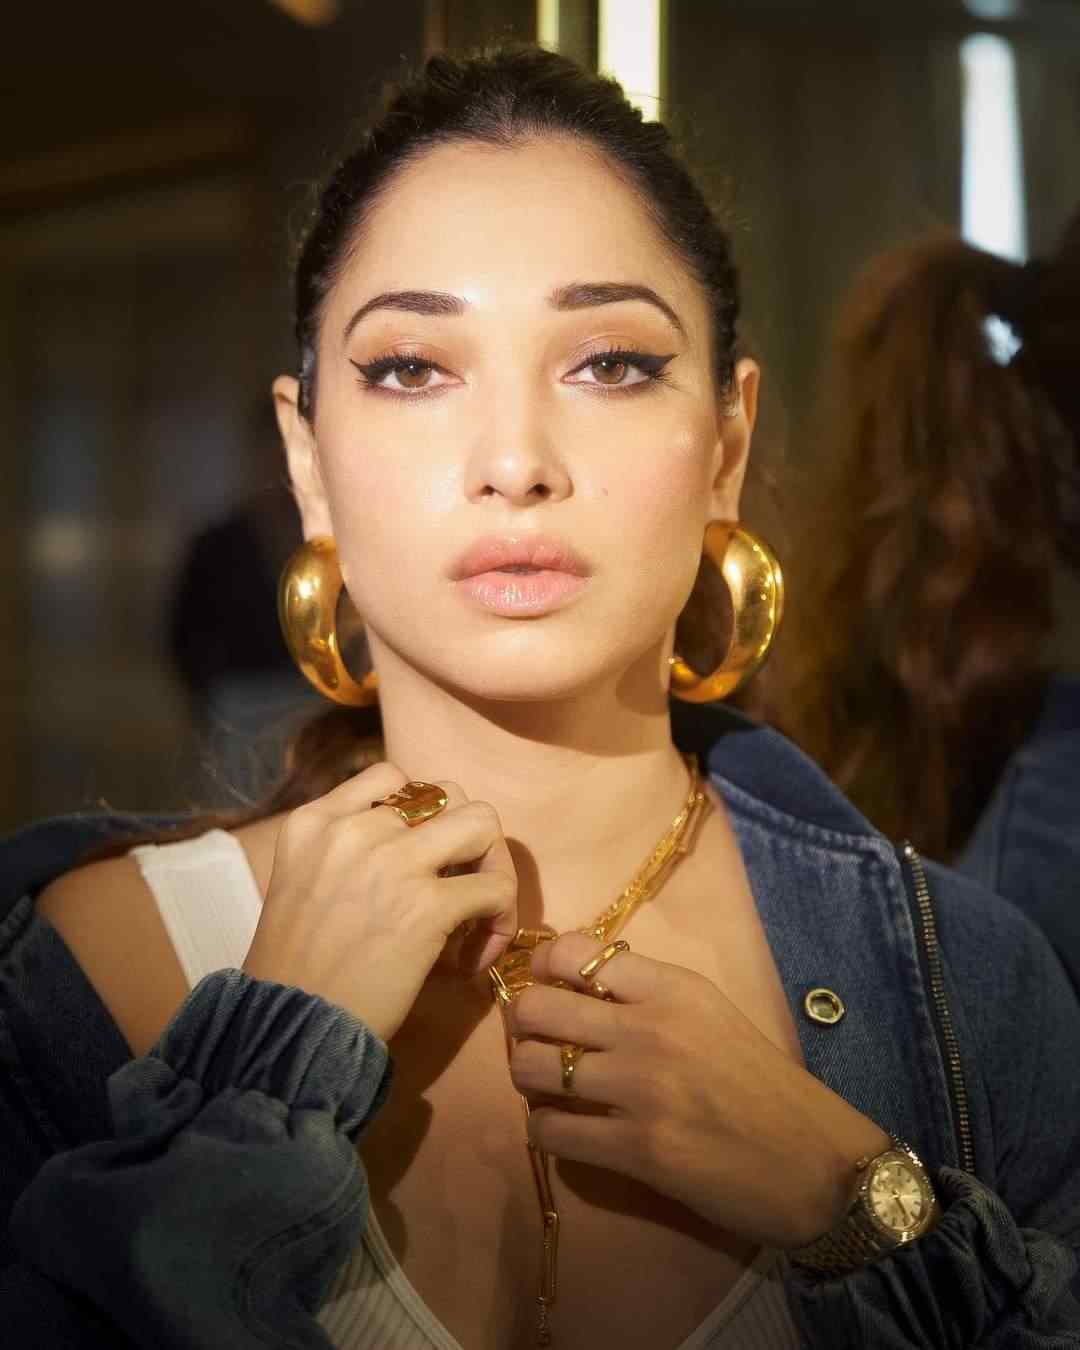 Tamannaah Bhatia,Tamannaah Bhatia in a sexy bralette and heart pattern black pants, Tamannaah Bhatia hot sexy photos, Tamannaah Bhatia xxx, Tamannaah Bhatia bikini, Tamannaah Bhatia boobs, Tamannaah Bhatia hot xxx video download, fashion, floral-appliquéd jersey flared-leg black pants and flower applique bustier-style black top